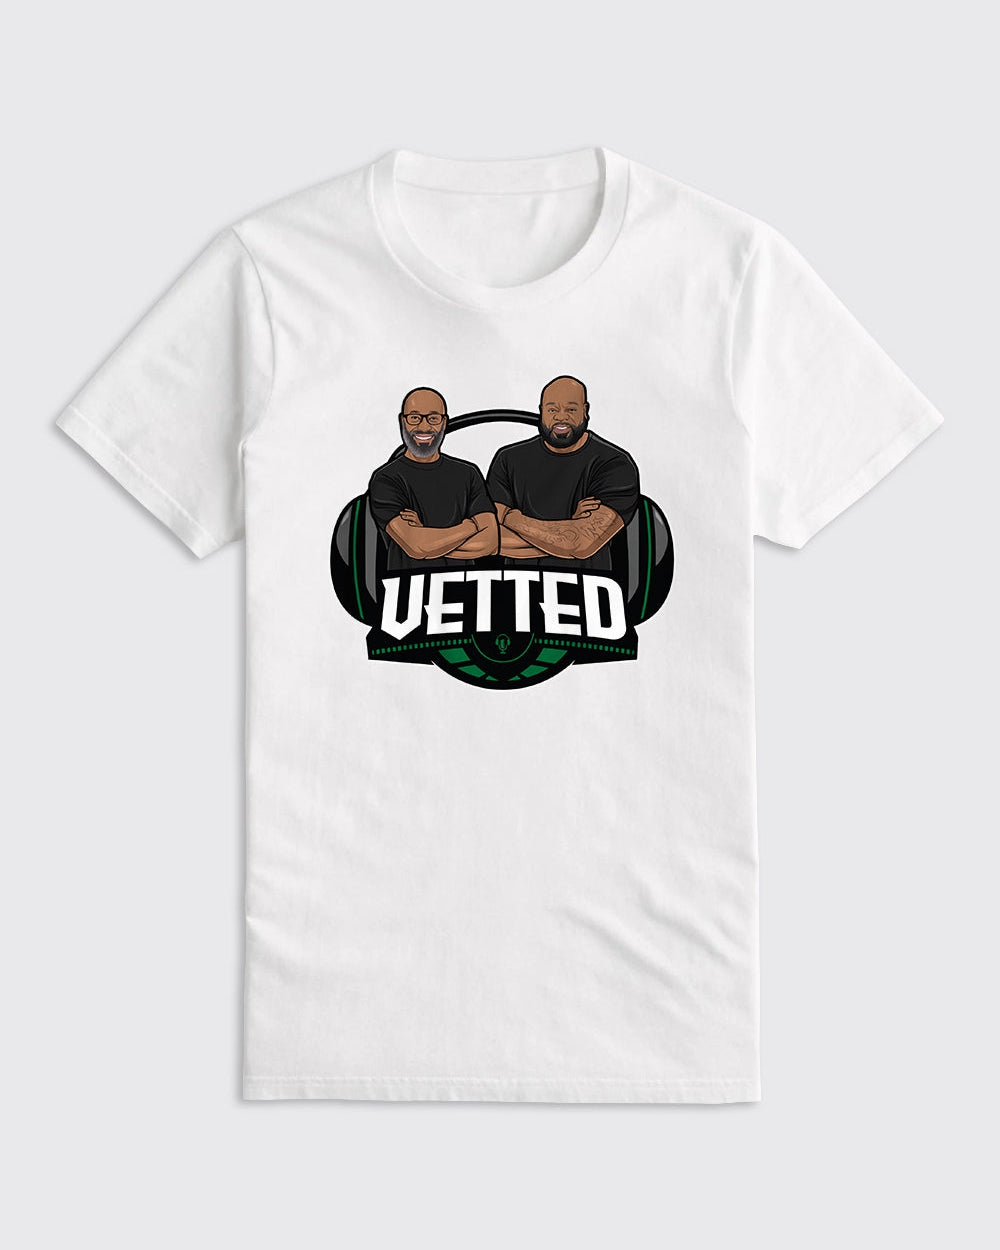 Vetted Podcast Shirt